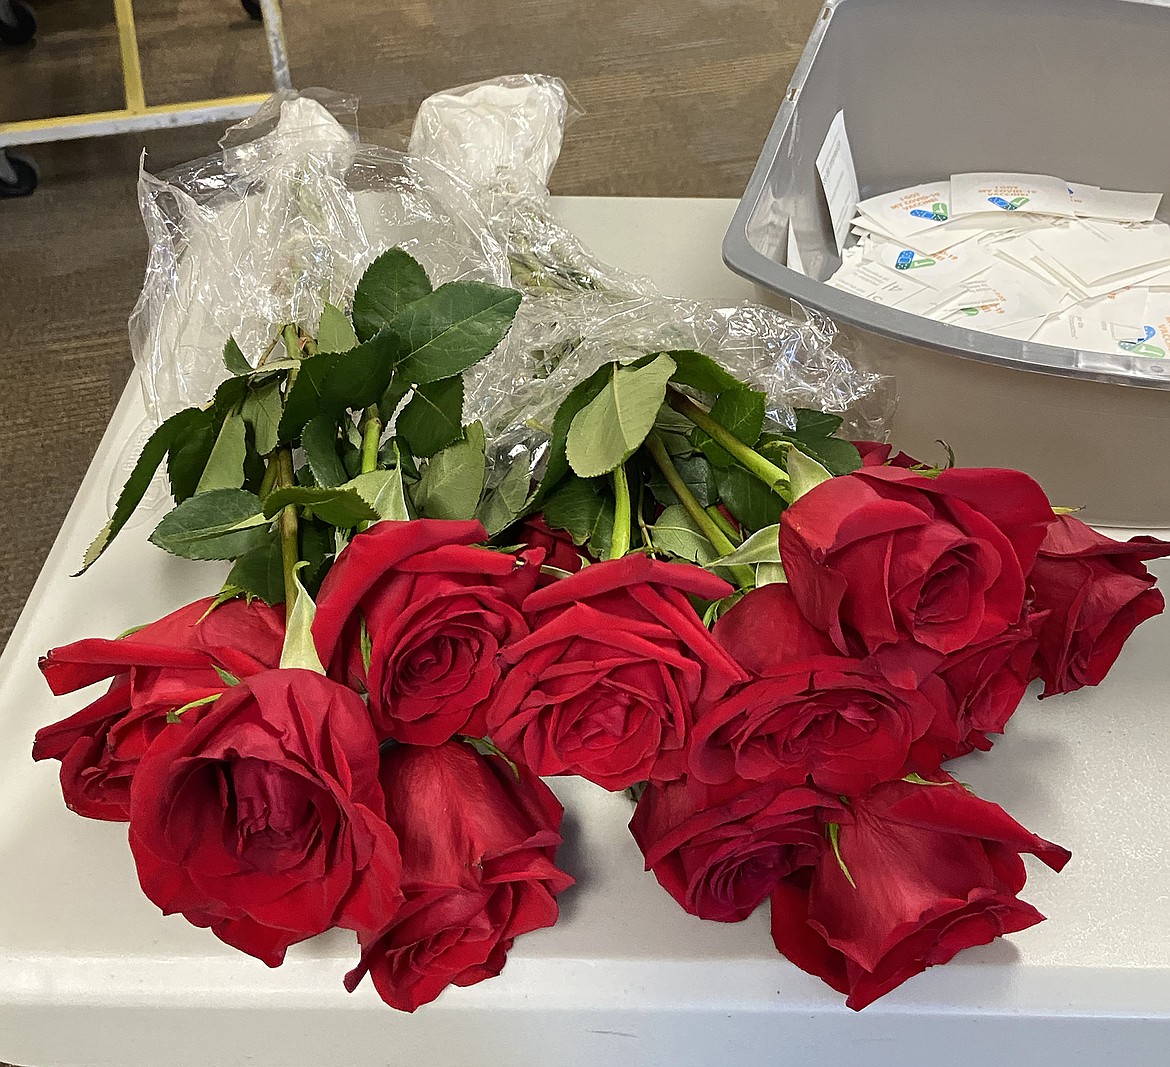 A woman was so thrilled to be receiving her COVID-19 vaccine Saturday, she brought along roses to give to those who made it possible.